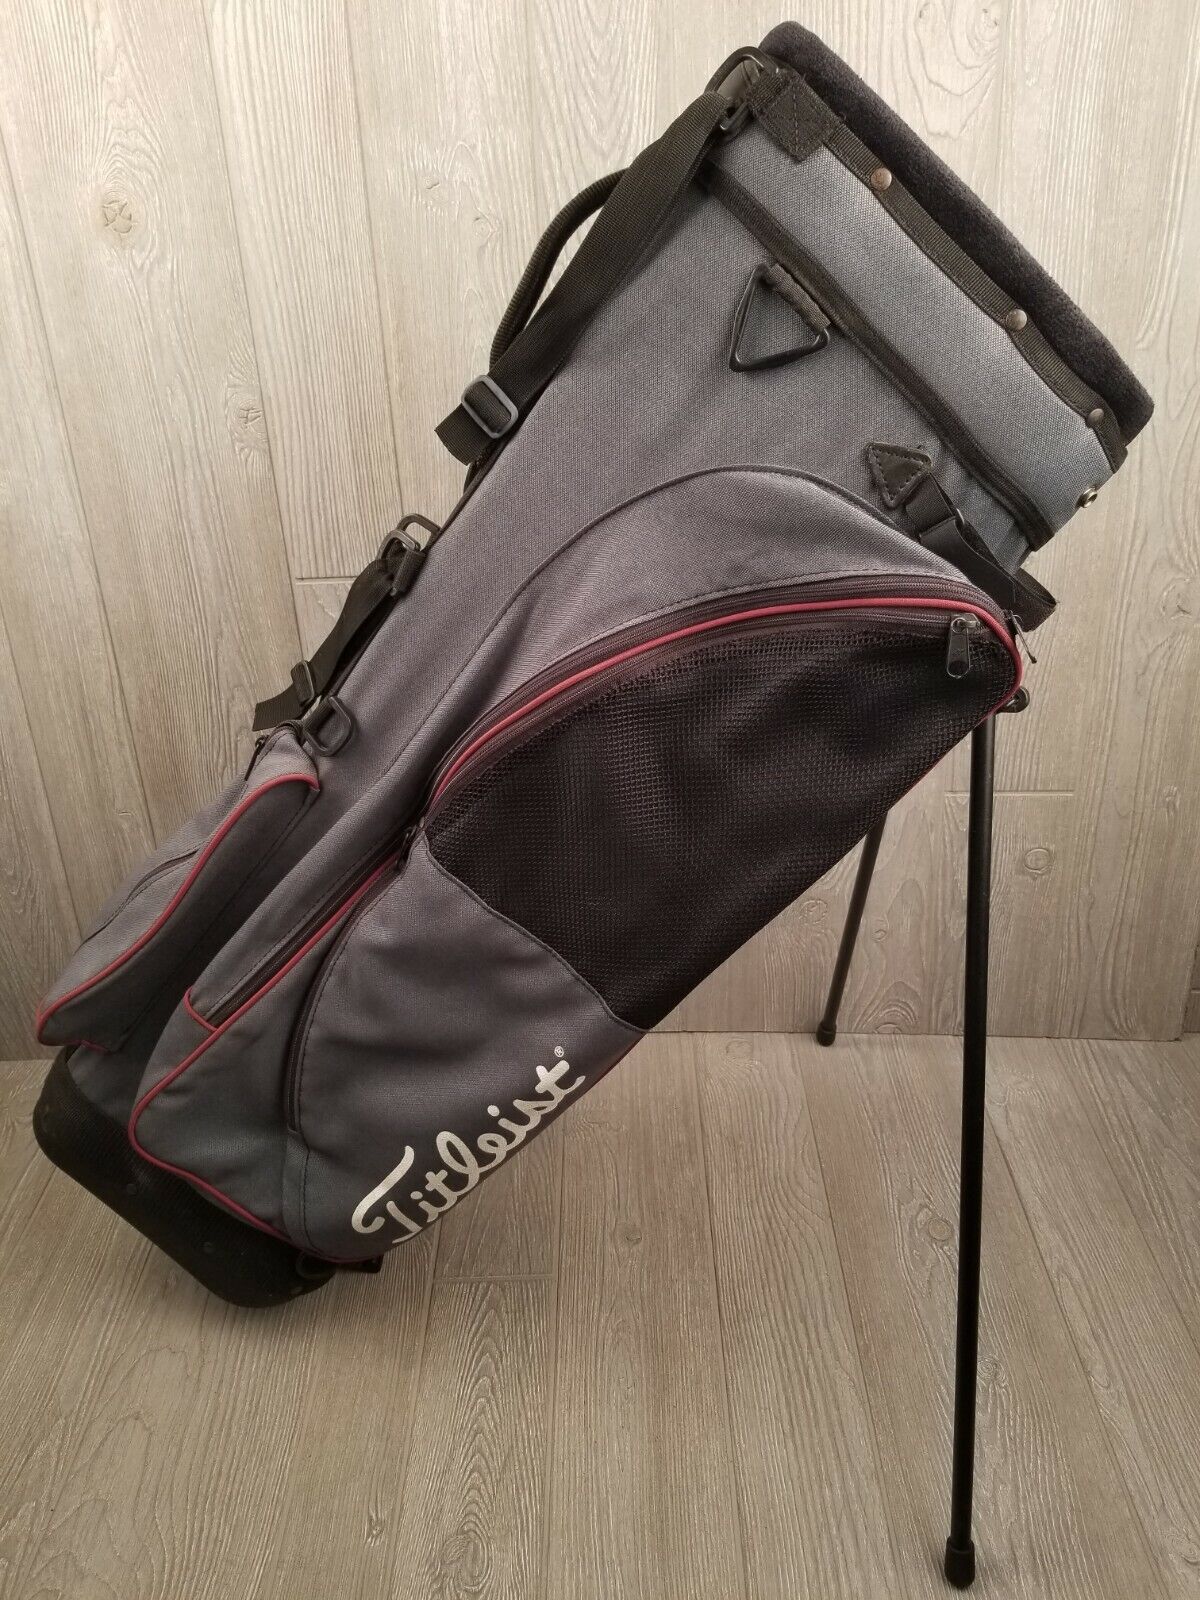 Titleist Golf Bag 3 Divided Grey, Black And Red B98-1M1099 